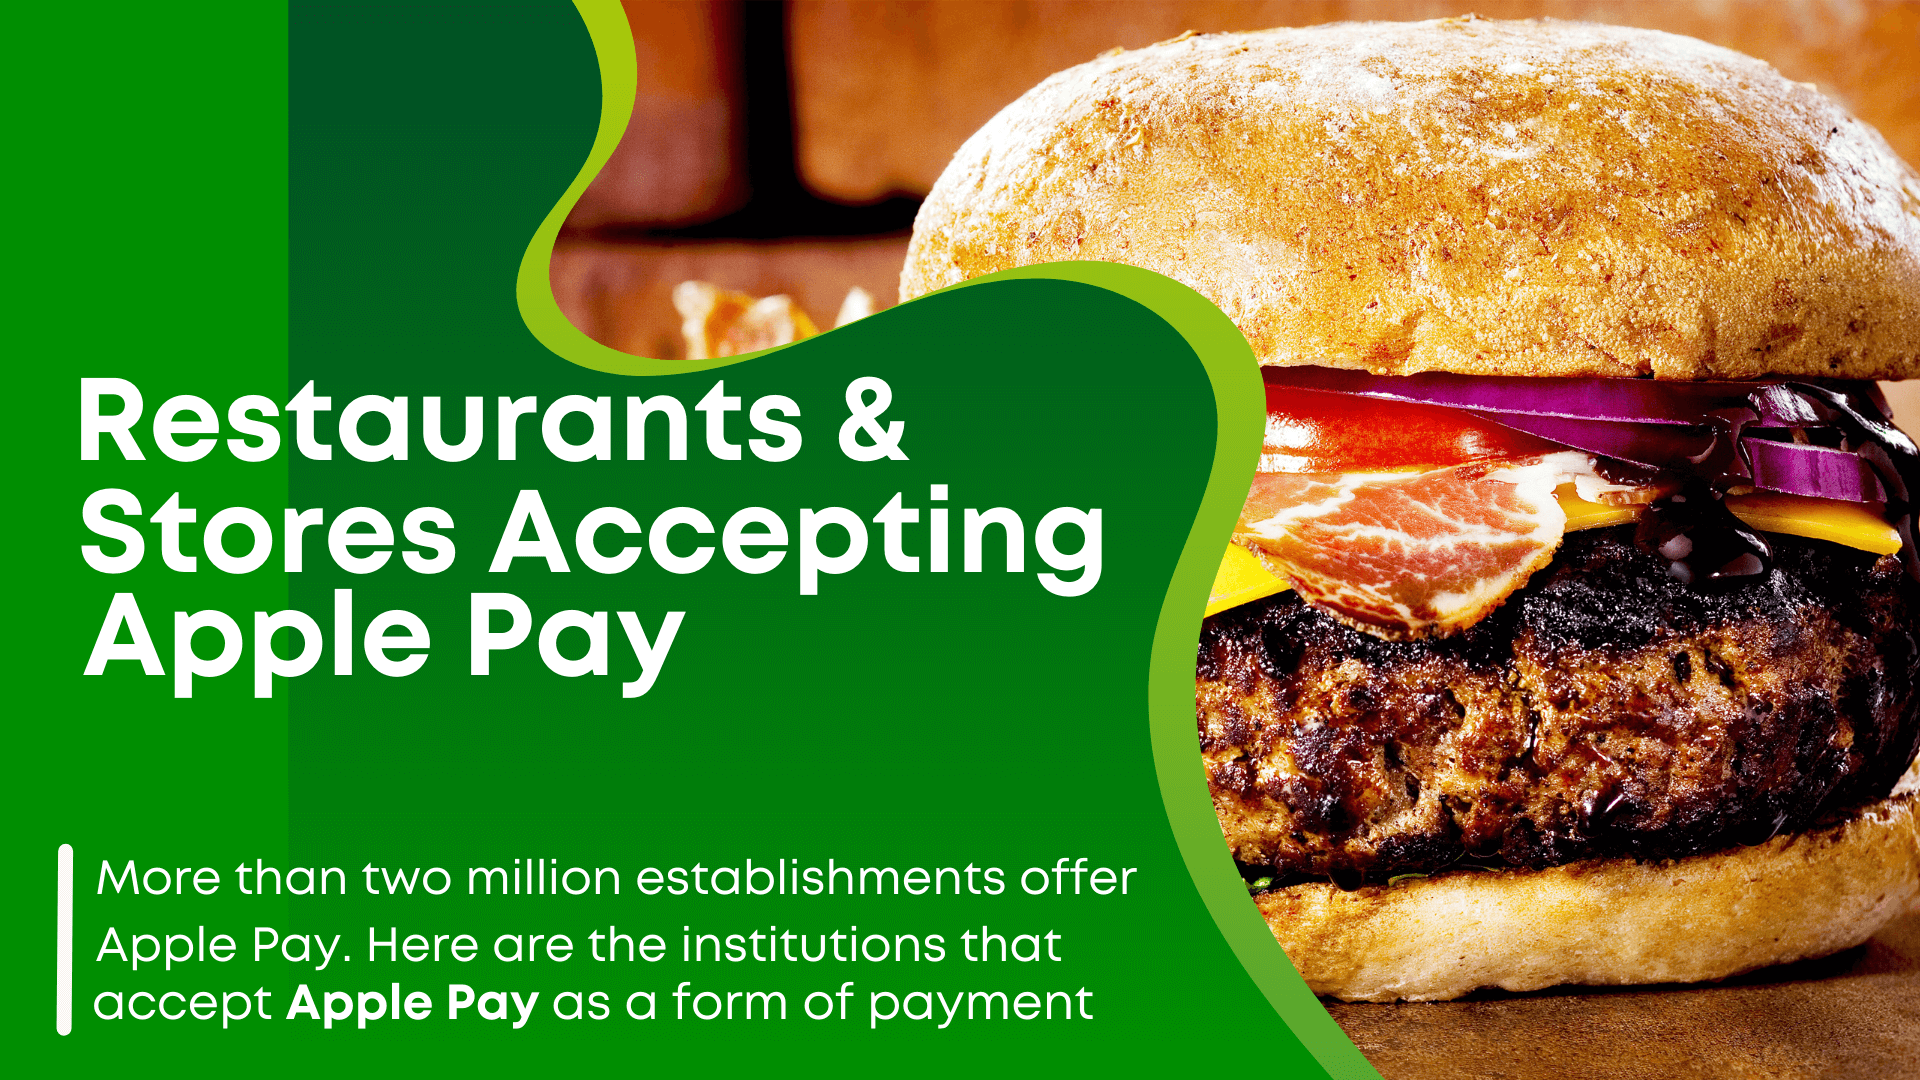 Fast Food Restaurants & Stores in the USA accepting Apple Pay